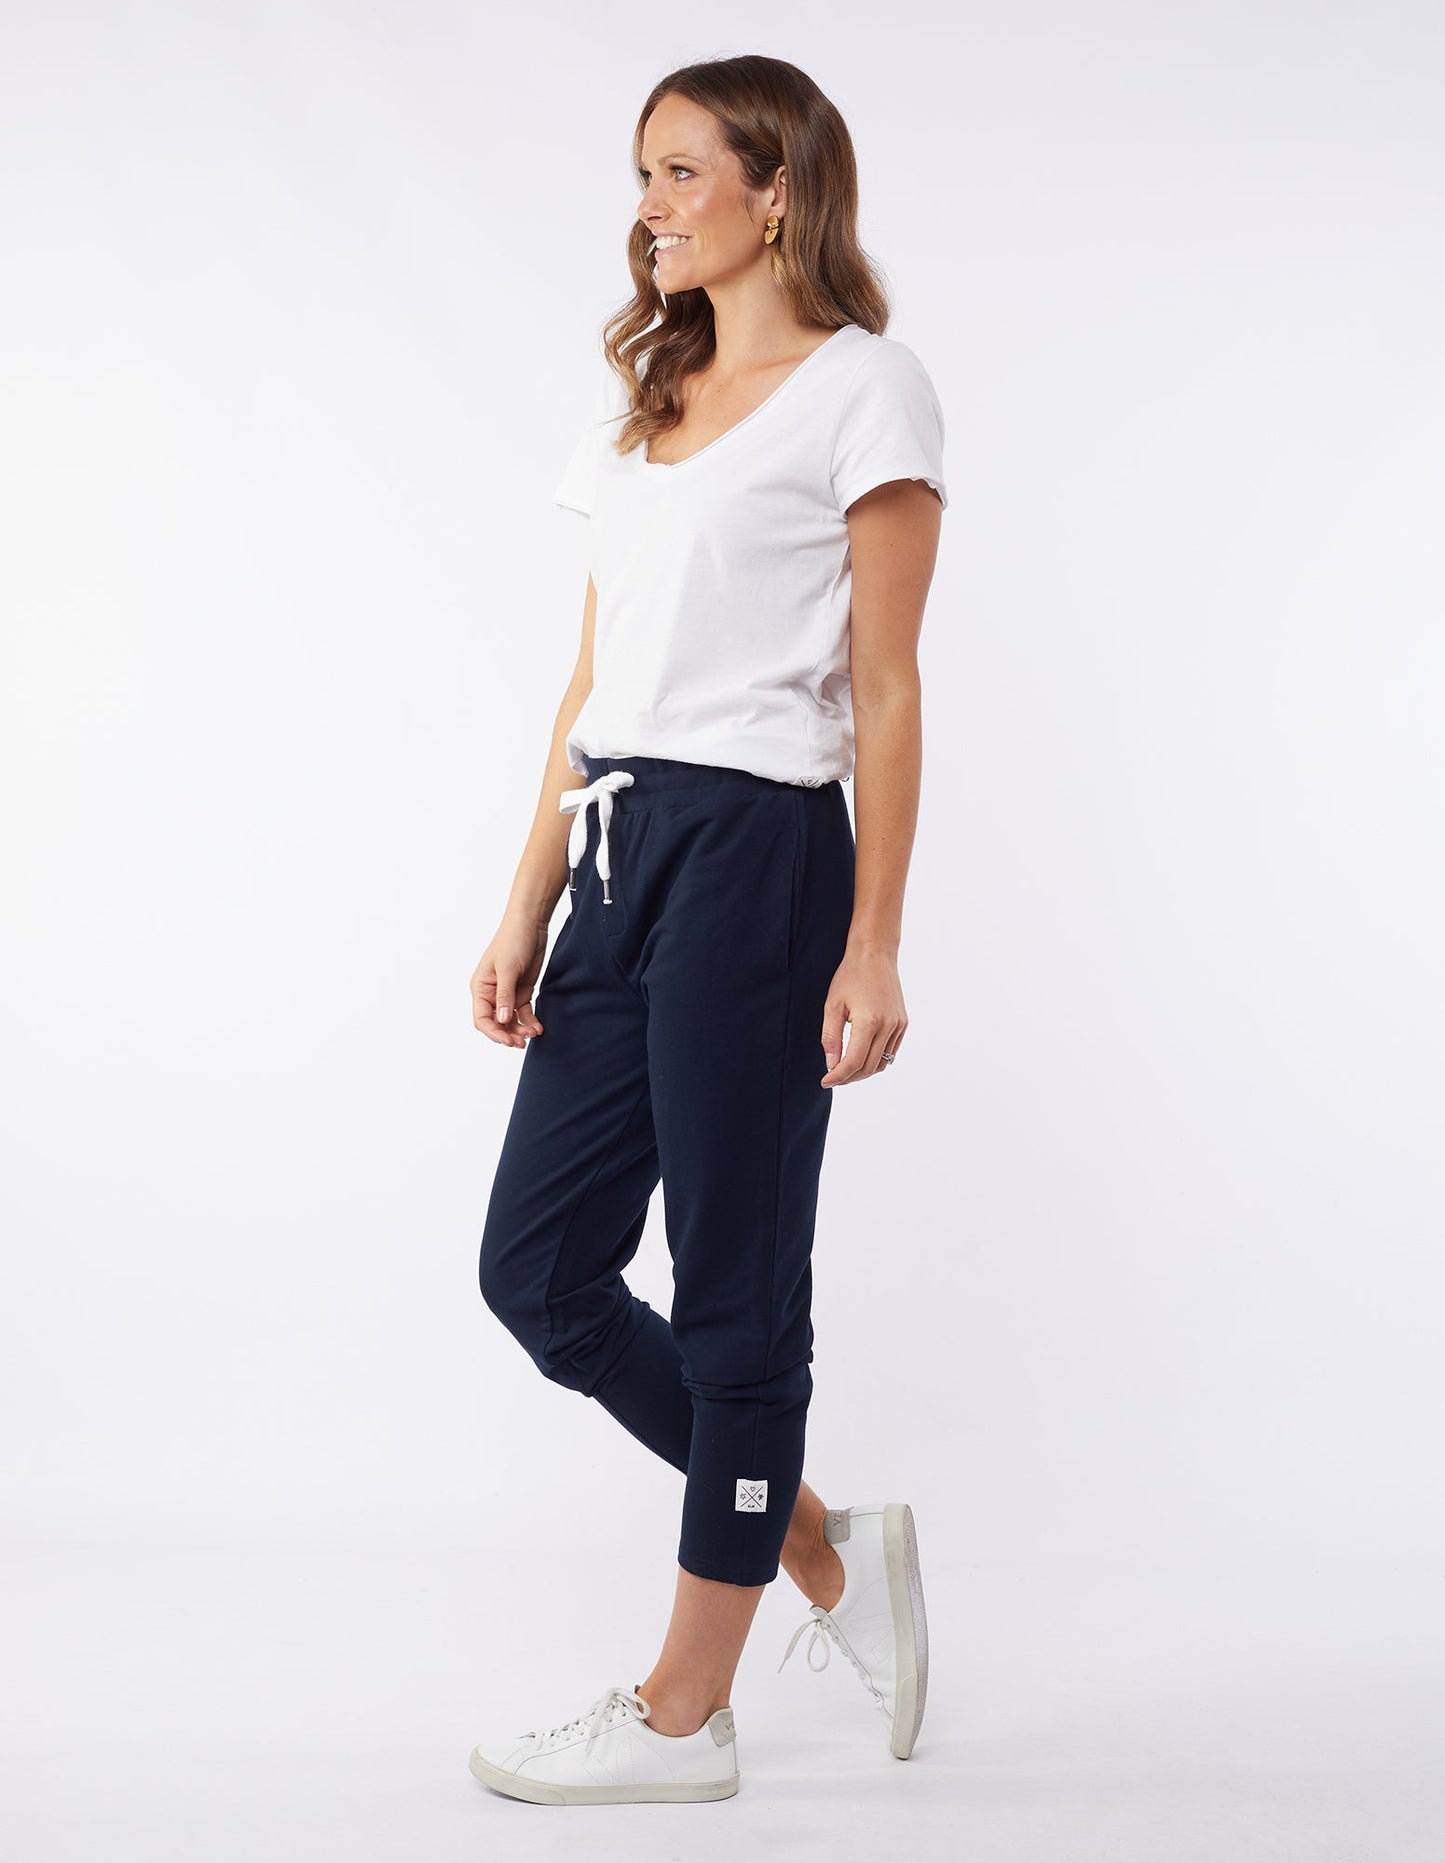 ELM LOBBY PANT - NAVY - THE VOGUE STORE